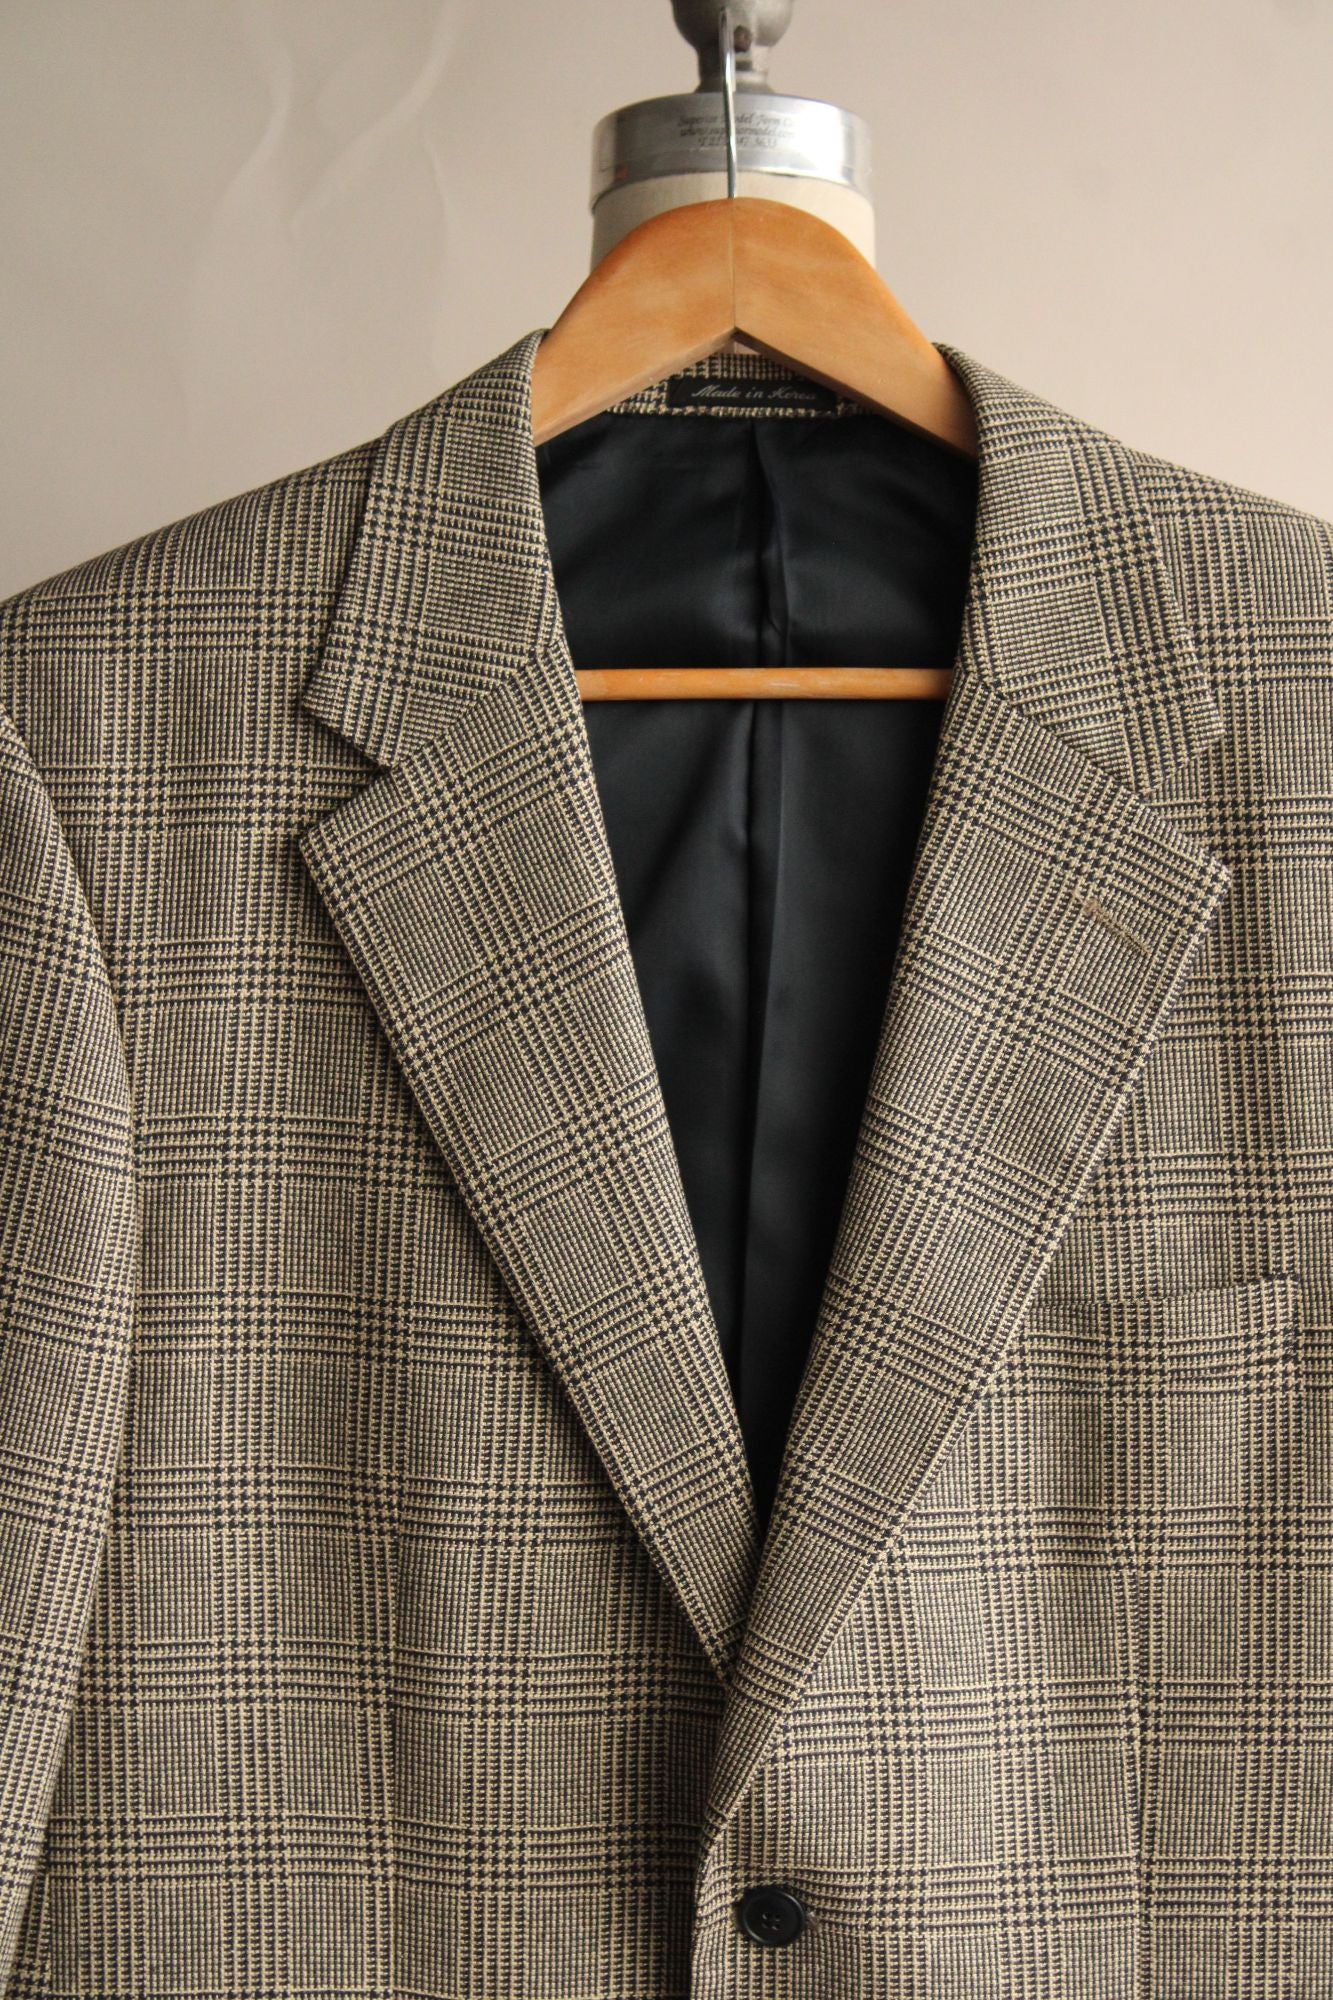 Club Room by Charter Club Mens Blazer, Size R40,  Macy's,Black and Tan Houndstooth